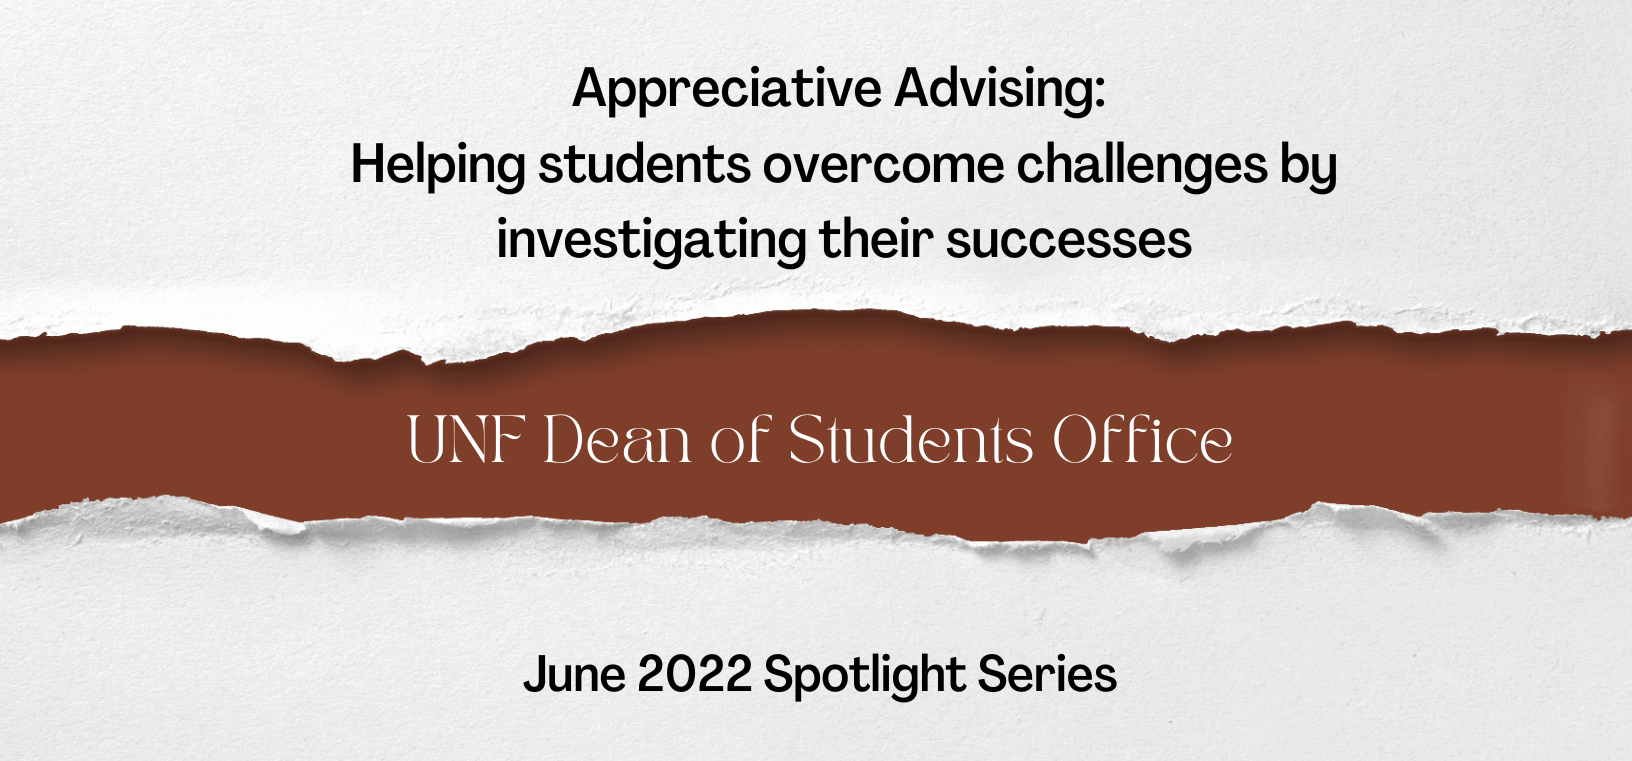 Spotlight-Series-Banner-June-2022-Appreciative Advising Helping students overcome challenges by investigating their successes